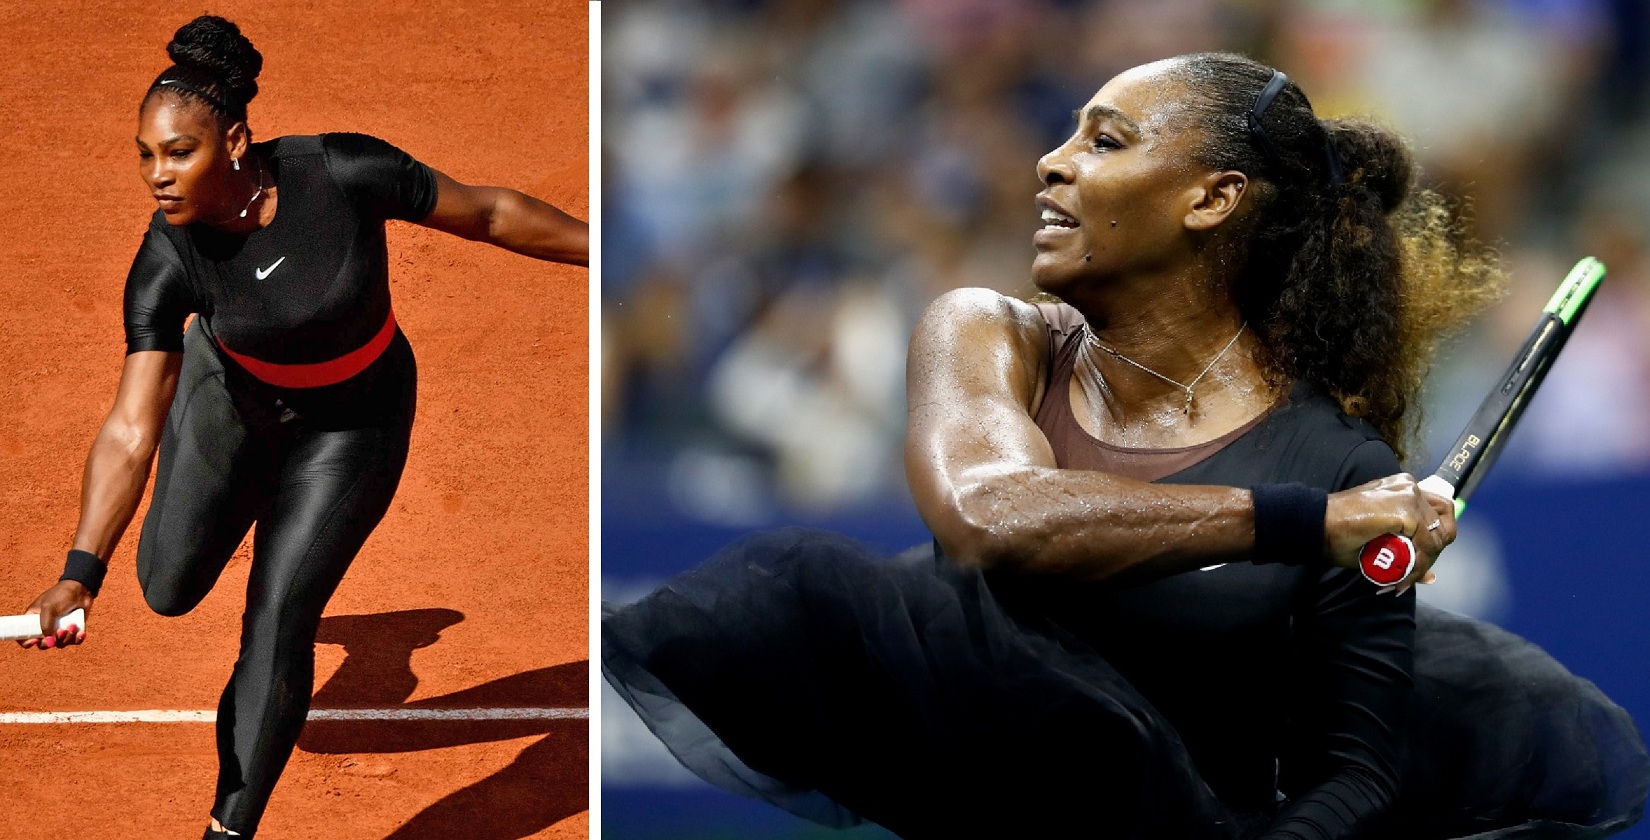 Serena Williams responds to backlash over her Catsuit by wearing a Tutu during match!